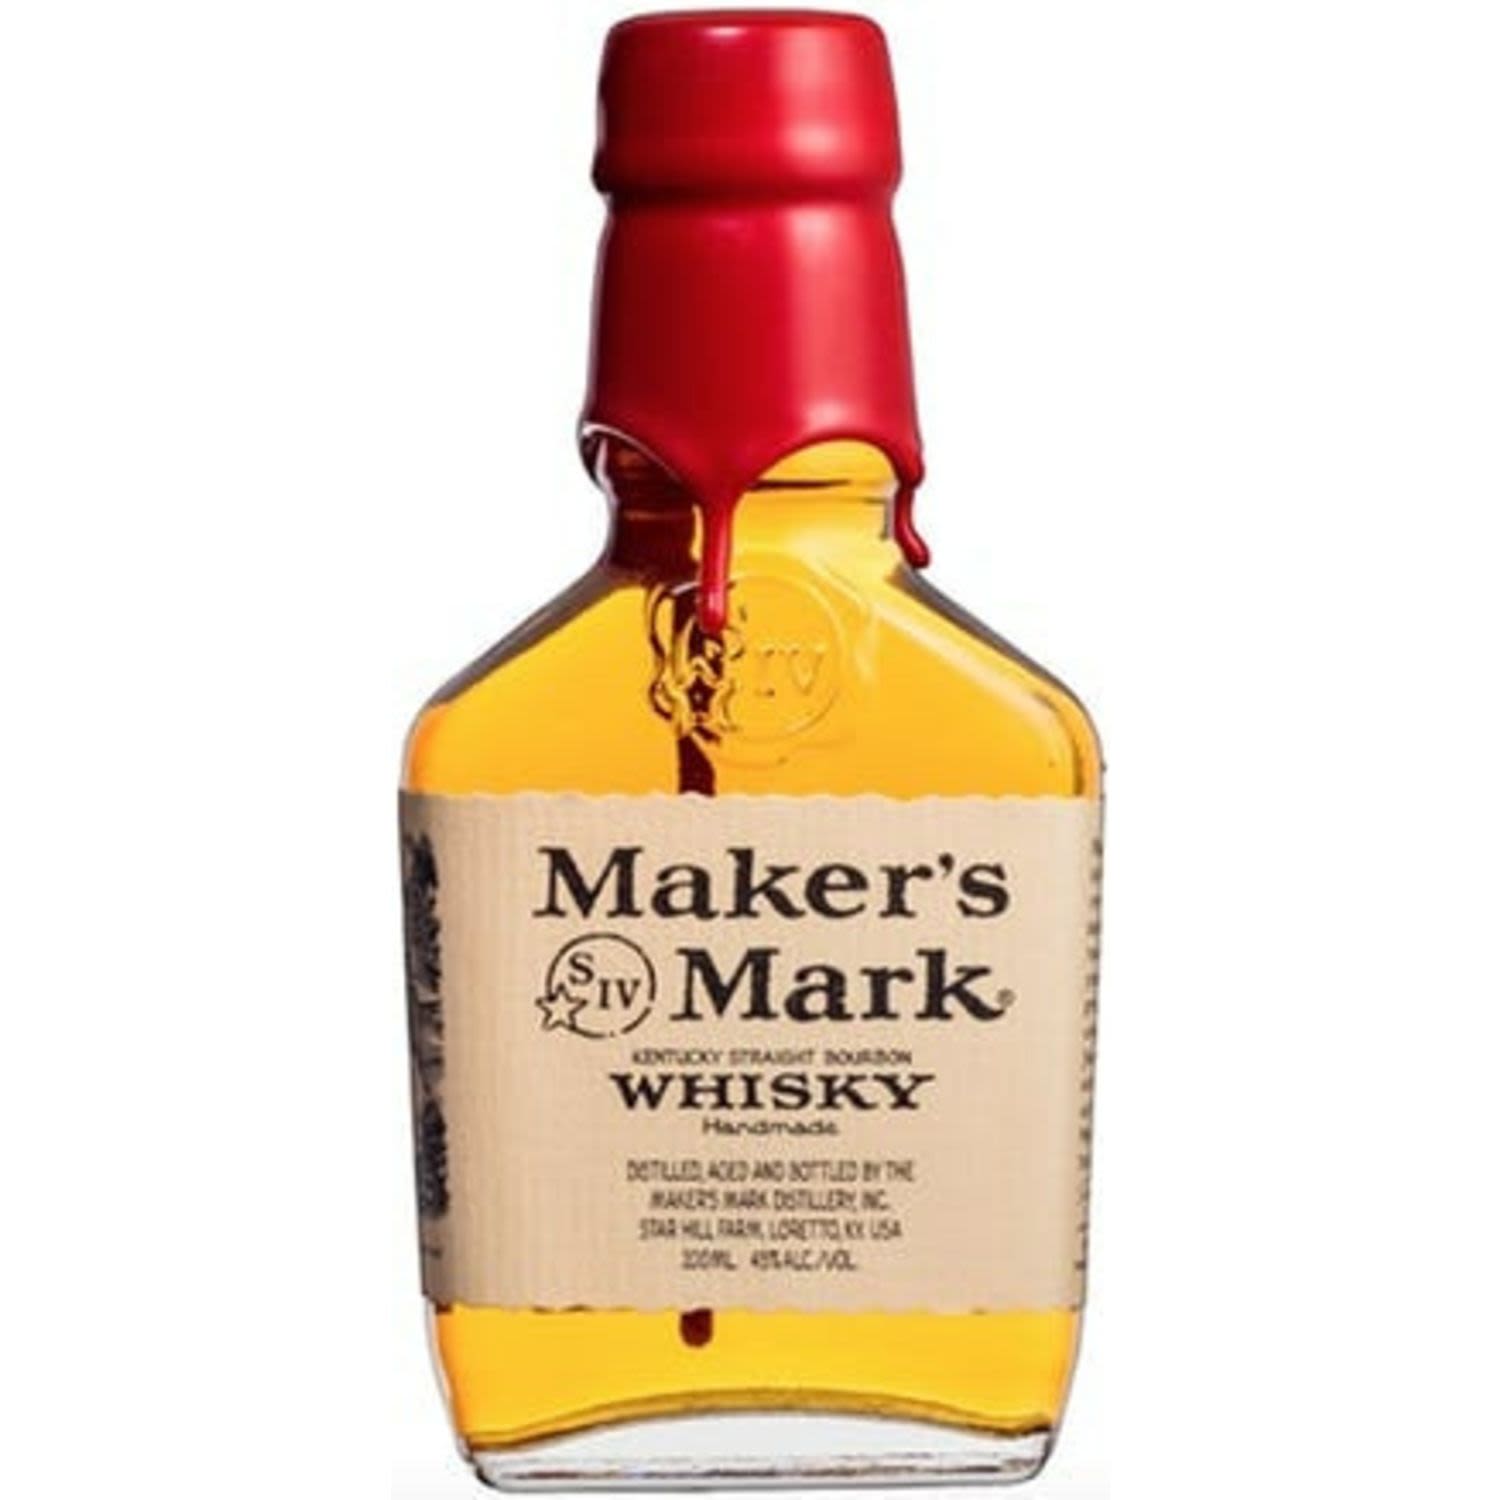 Maker's Mark is a unique and full-flavoured, hand-made Bourbon, made using the old-style sour-mash method and sealed with the iconic red wax. It is smooth and approachable with an easy finish – a true contrast to hot, harsh whiskies that "blow your ears off," and a downright revolutionary idea at the time. <br /> <br />Alcohol Volume: 40.00%<br /><br />Pack Format: Bottle<br /><br />Standard Drinks: 6.3</br /><br />Pack Type: Bottle<br /><br />Country of Origin: USA<br />